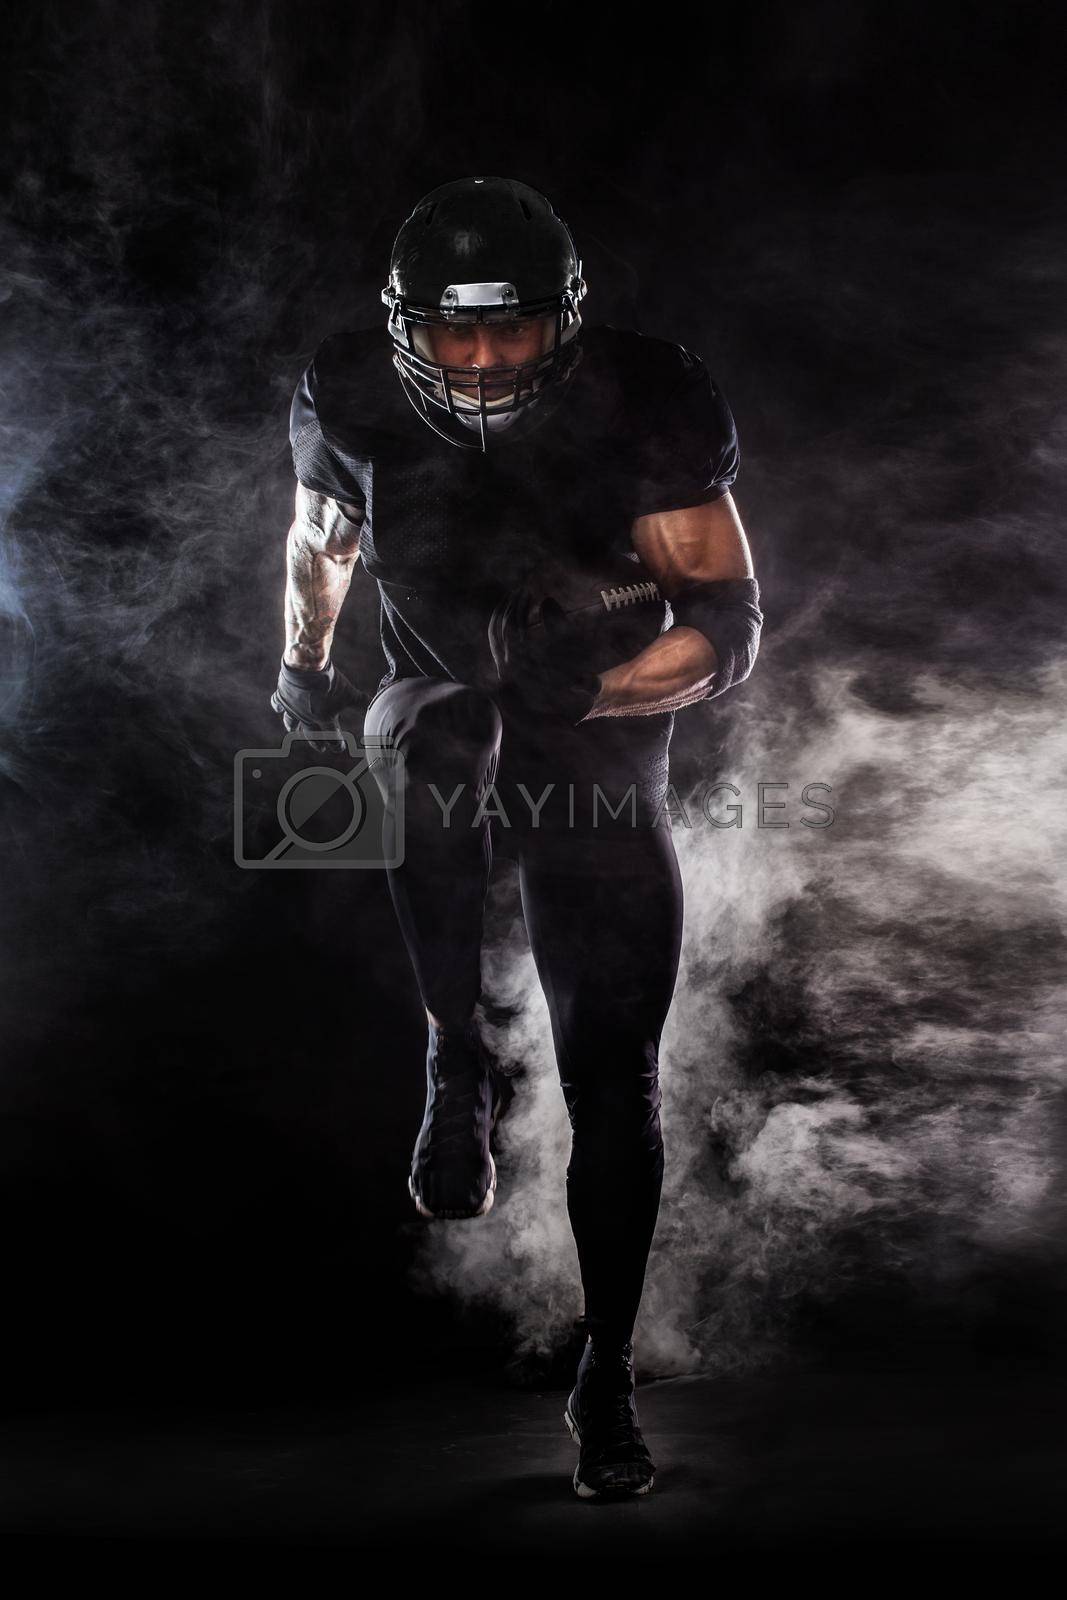 Royalty free image of American football sportsman player isolated on black background by MikeOrlov